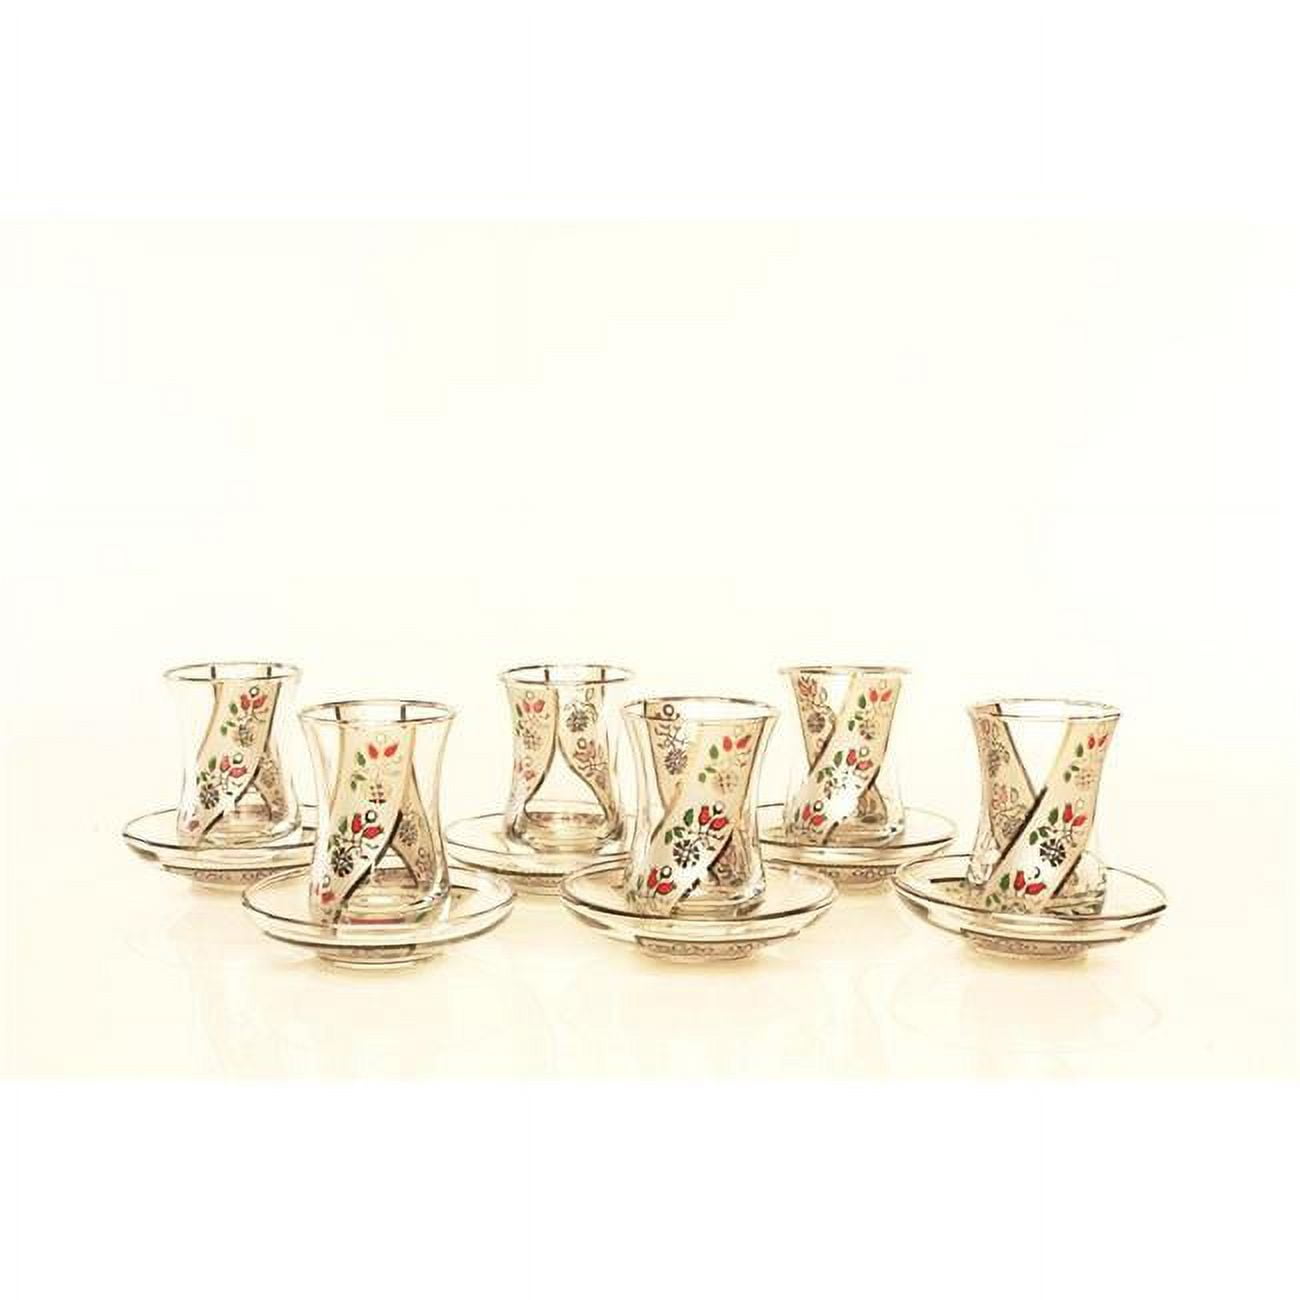 Tea Cup With Silver Design, Set Of 6